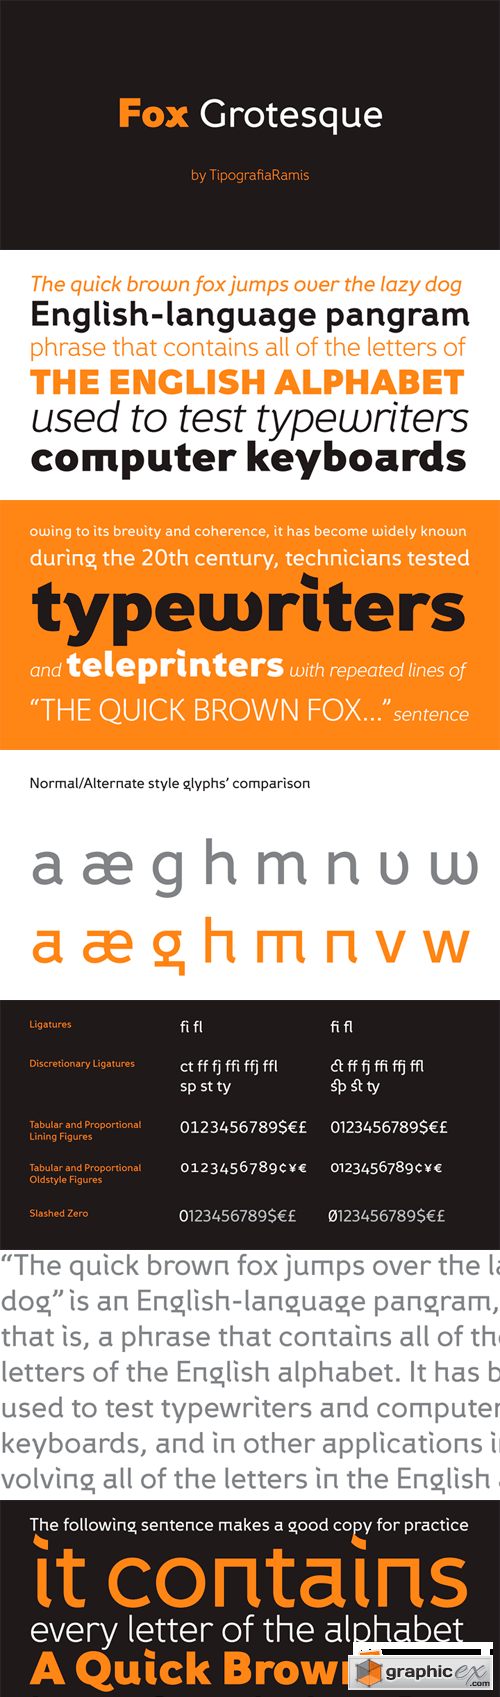 Fox Grotesque Font Family - 12 Fonts for $200